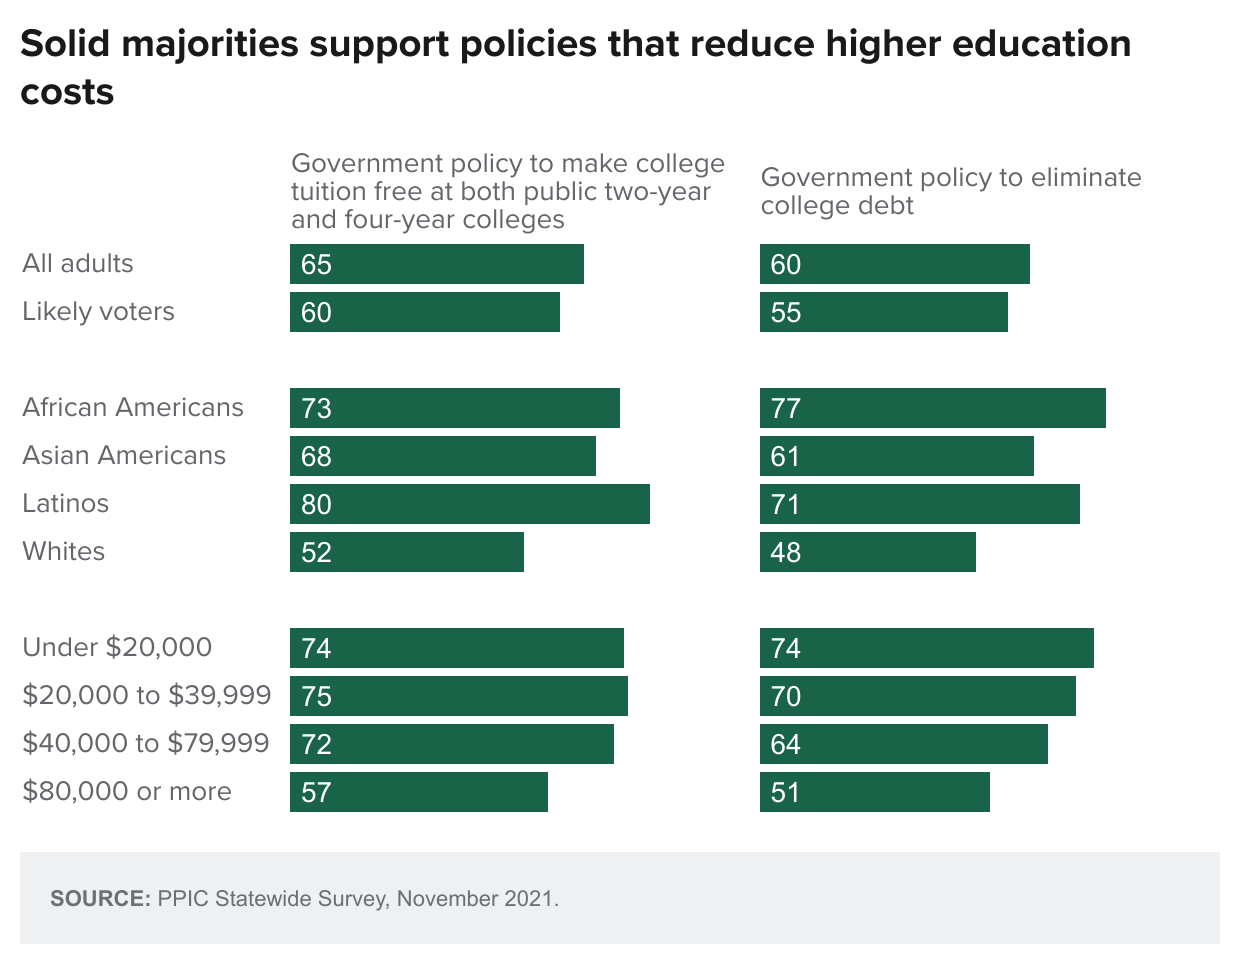 figure - Solid Majorities Support Policies That Reduce Higher Education Costs